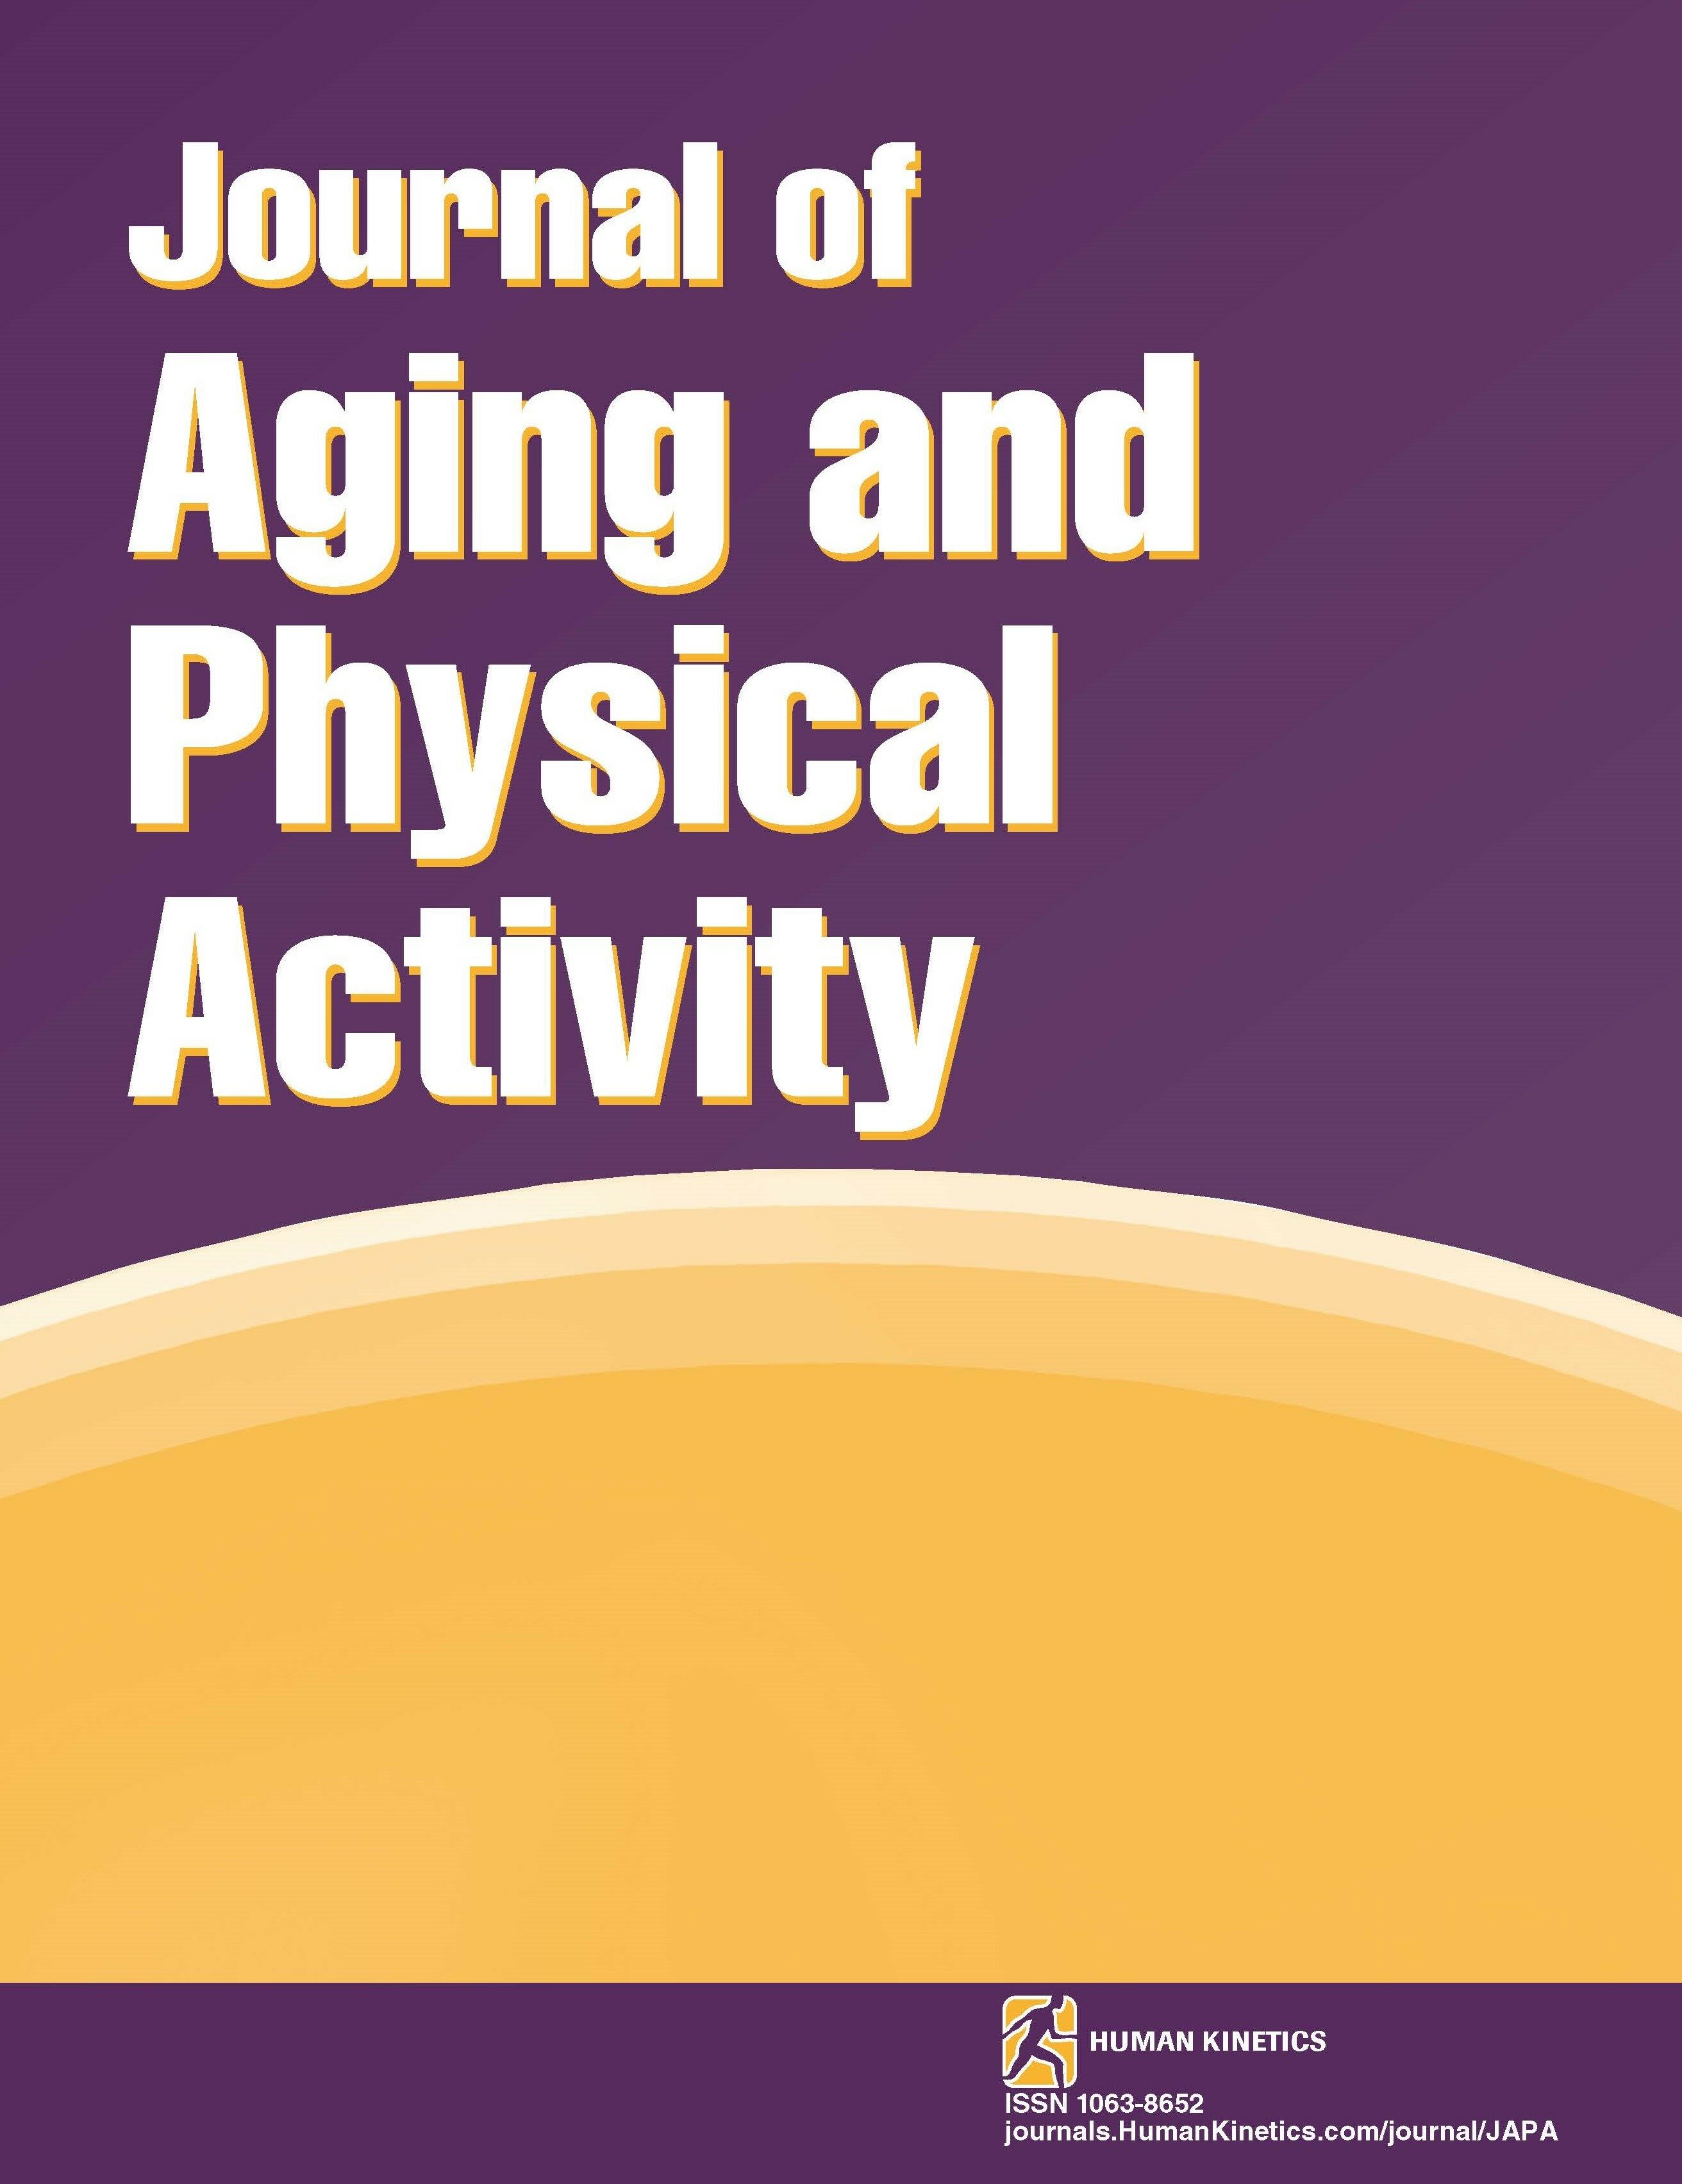 mHealth-Supported Interventions With Potential to Address Sedentary Behavior in Older Adults: A Scoping Review